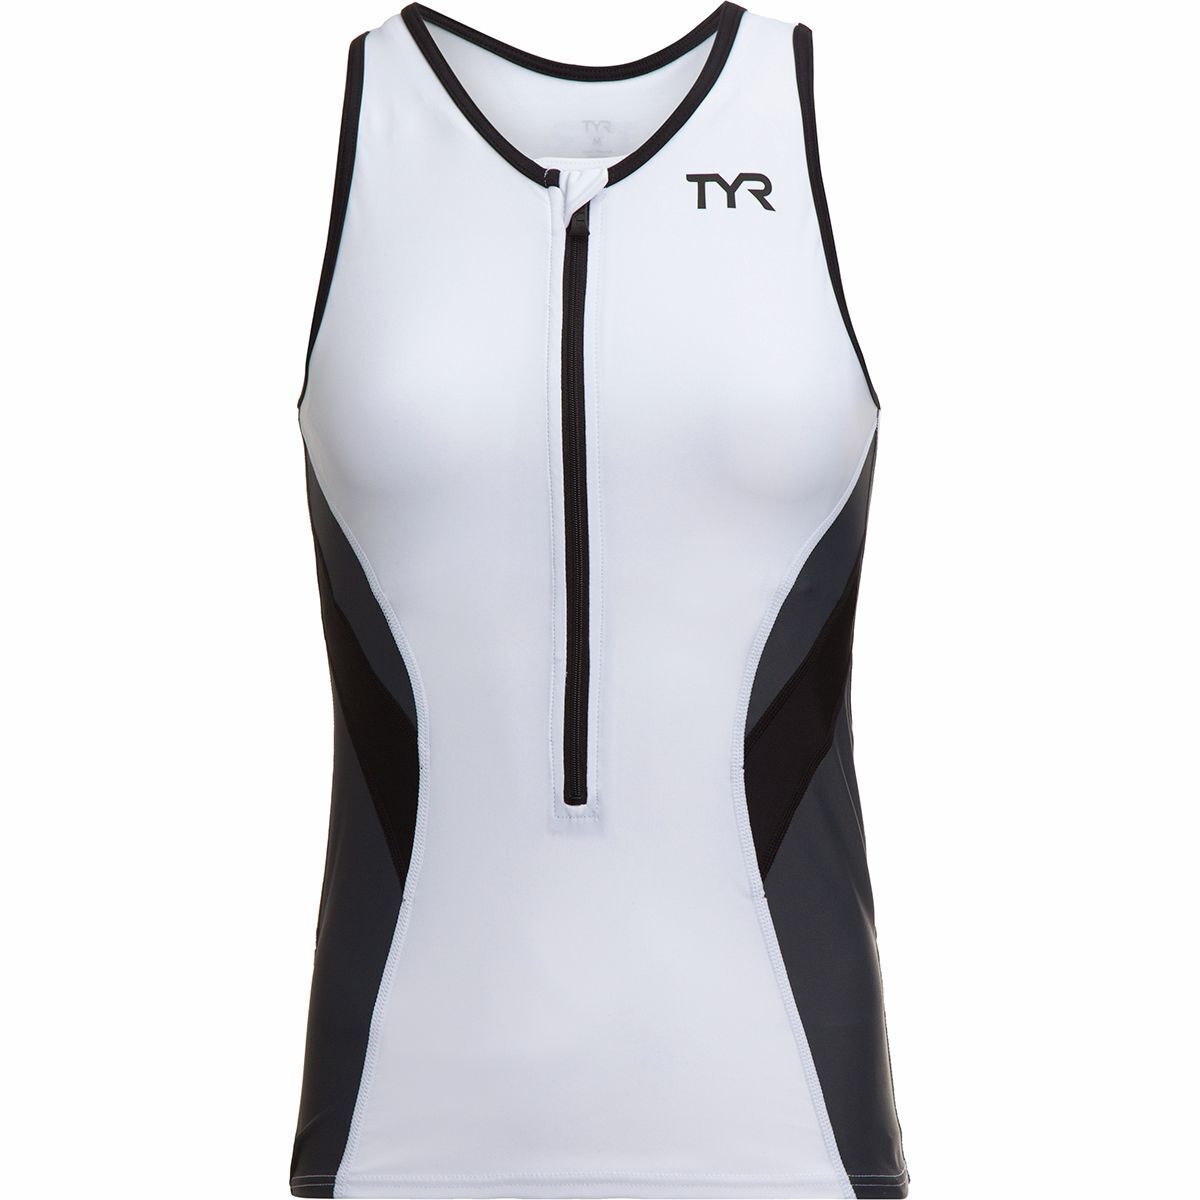 Women's Cycling Shirt Black Lime NWT MSRP $71.99 Details about   TYR Competitor Tank Top 